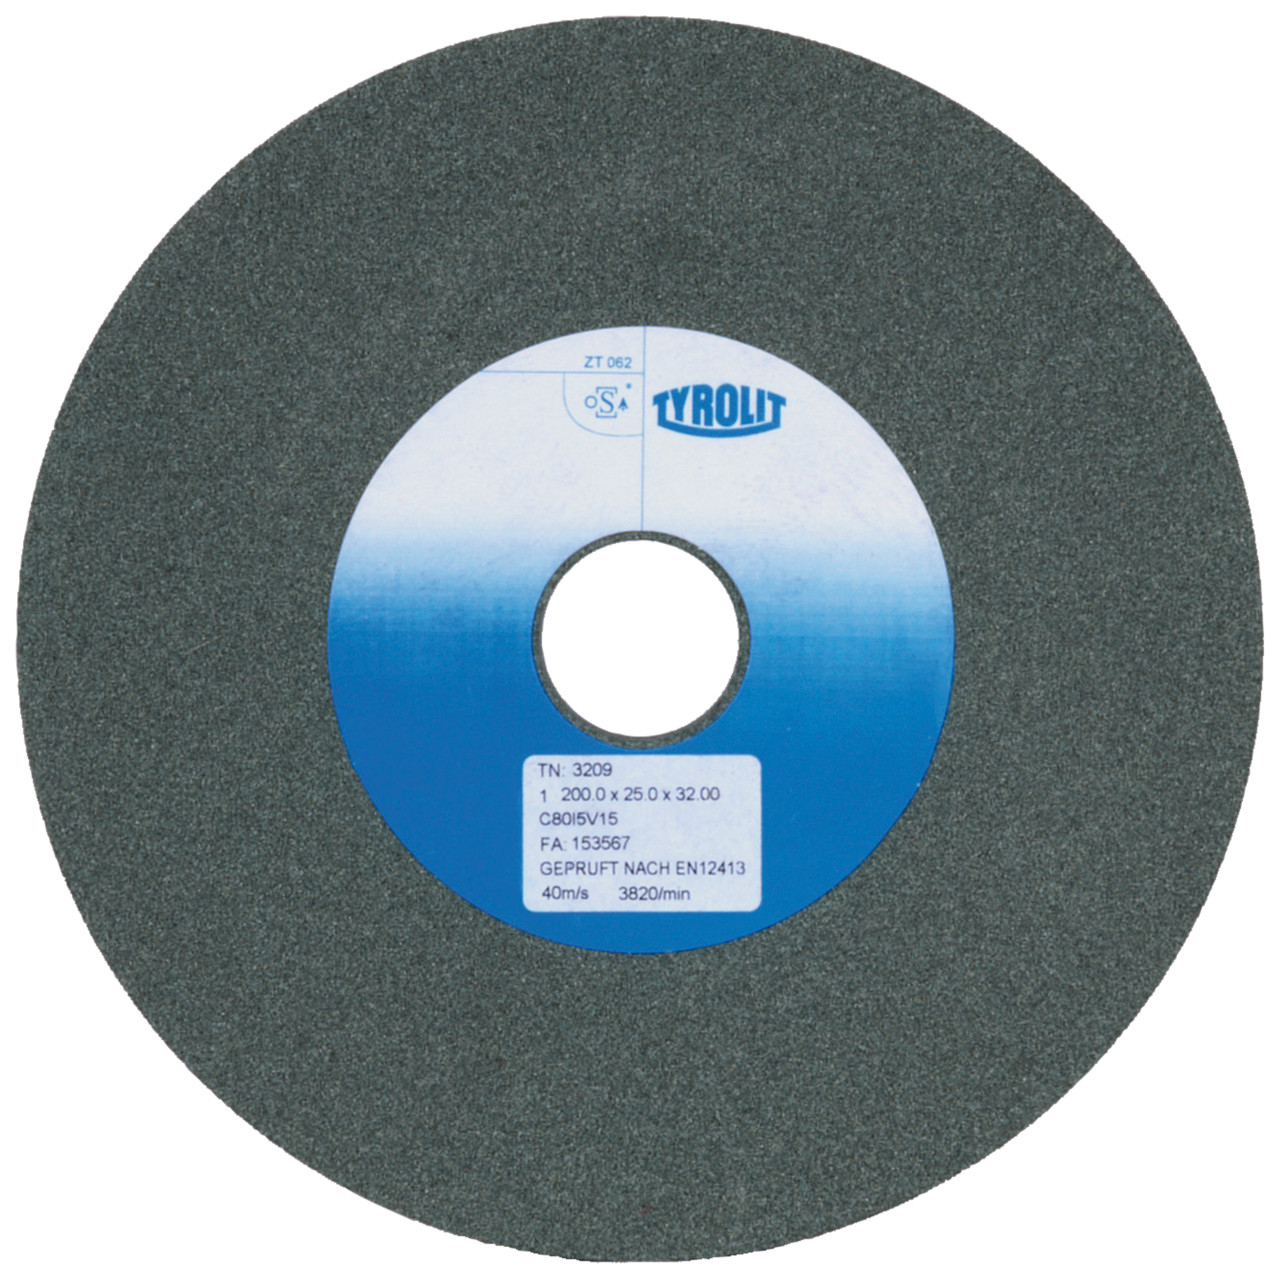 Tyrolit Conventional ceramic grinding discs DxDxH 150x25x32 For carbide and cast iron, shape: 1, Art. 146644